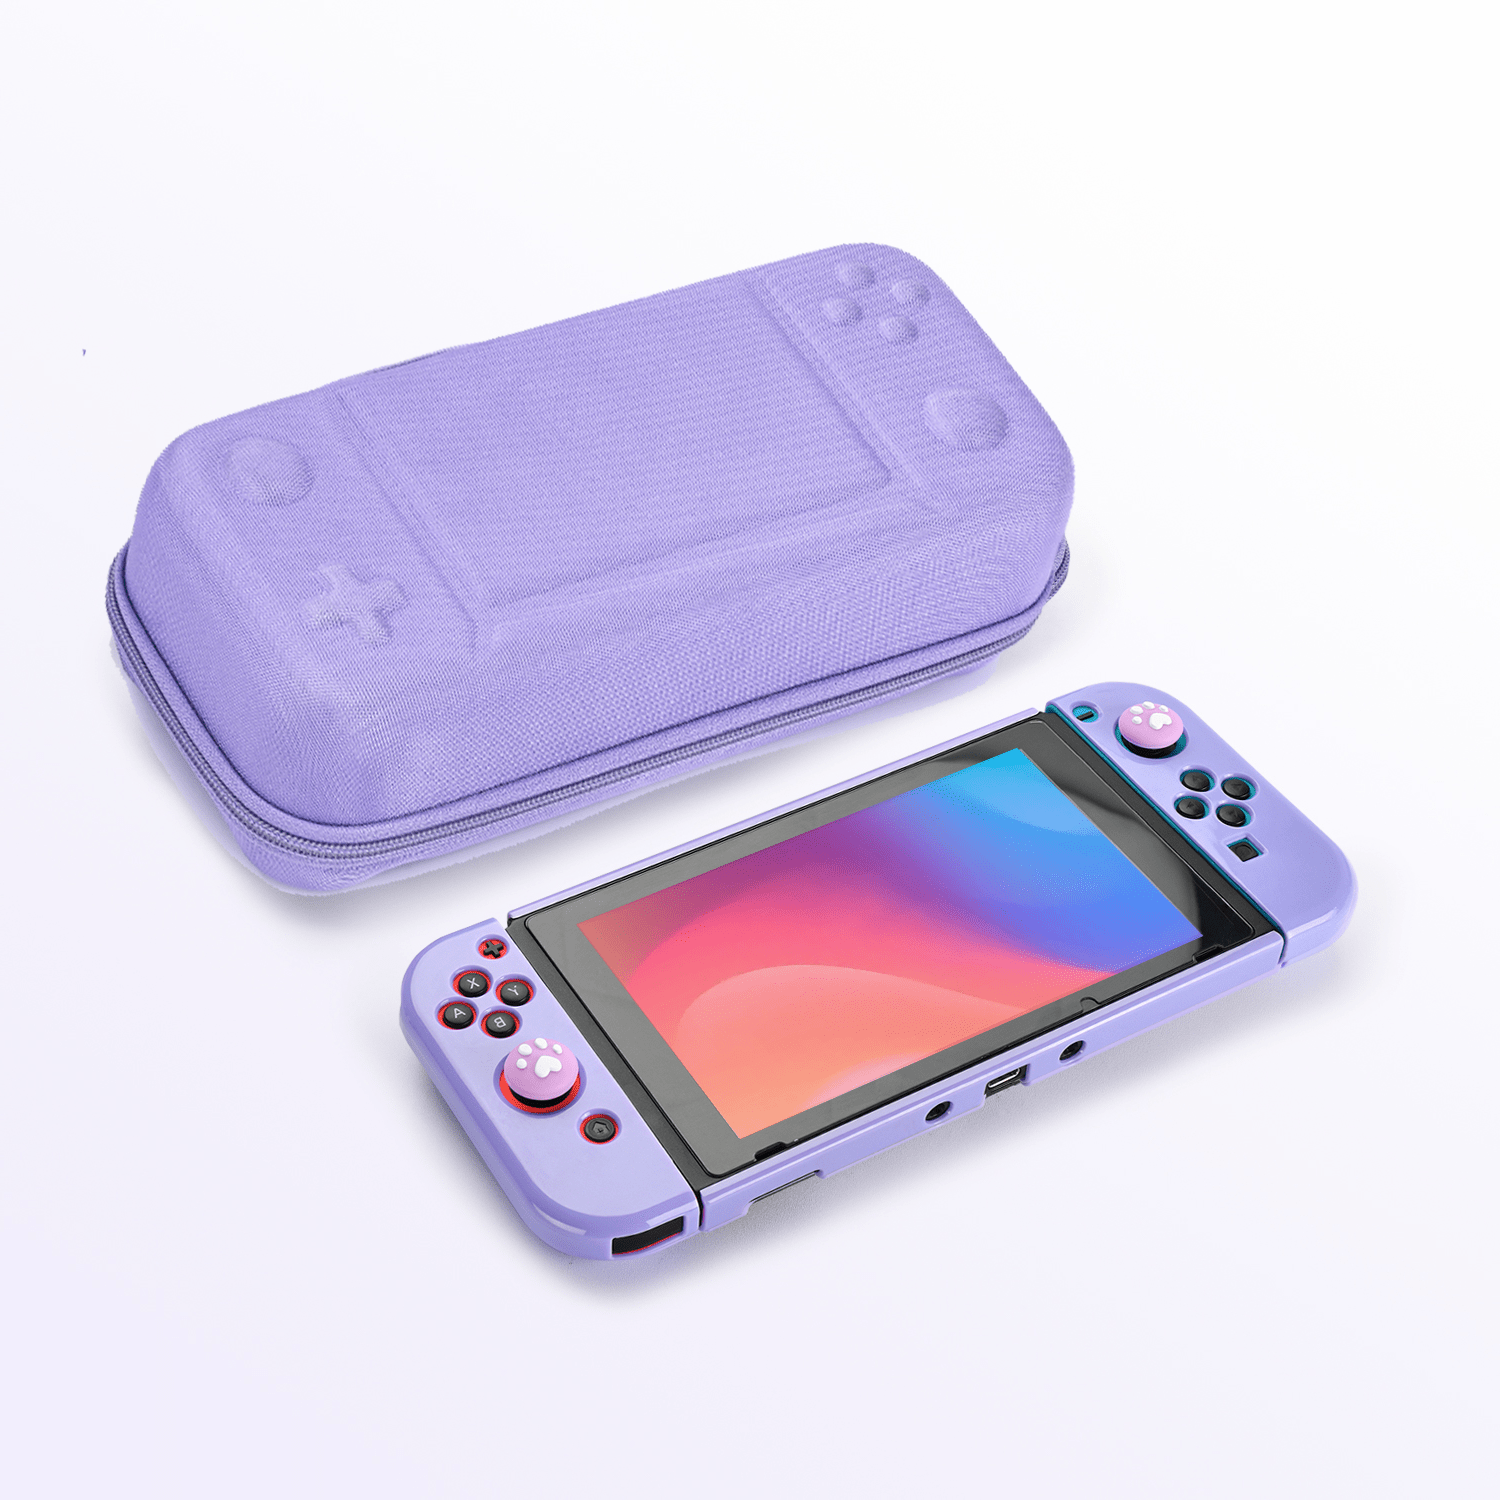 Younik Button Design Nintendo Switch Protective Case, Carry Case for NS Switch